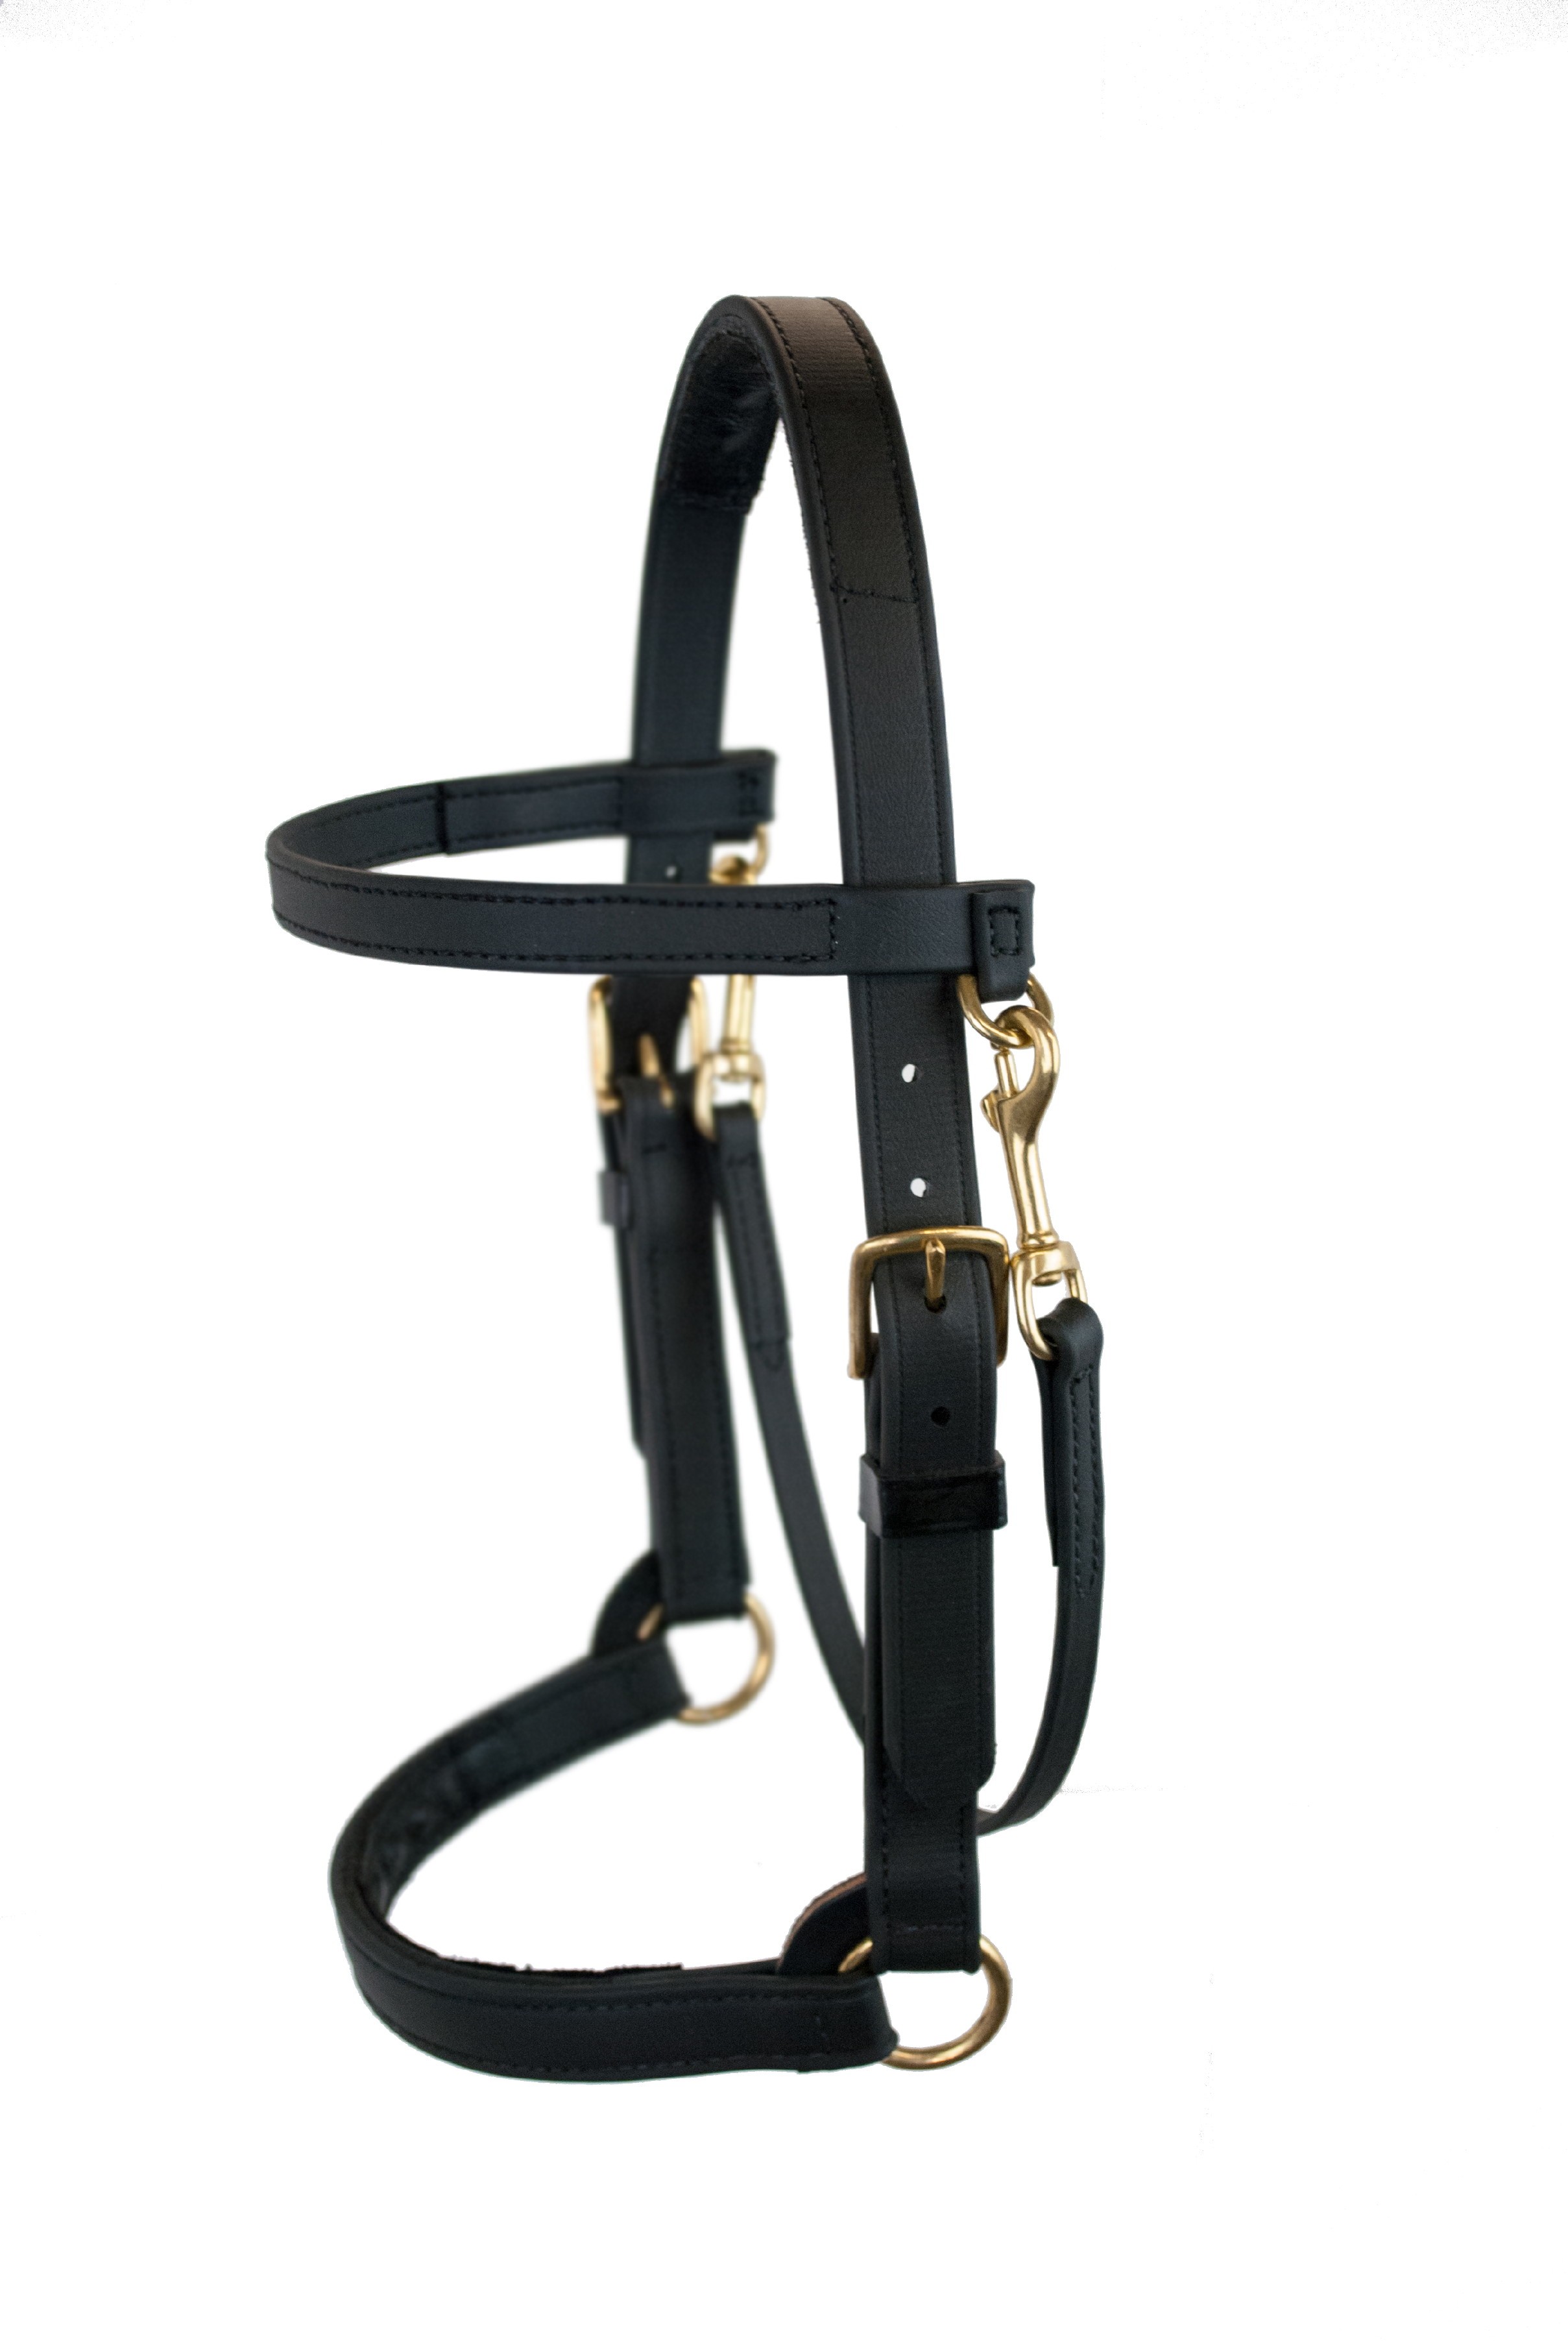 Heavy Duty 1" wide Beta Training Halter with Ball Bearings in Nose Band- Black